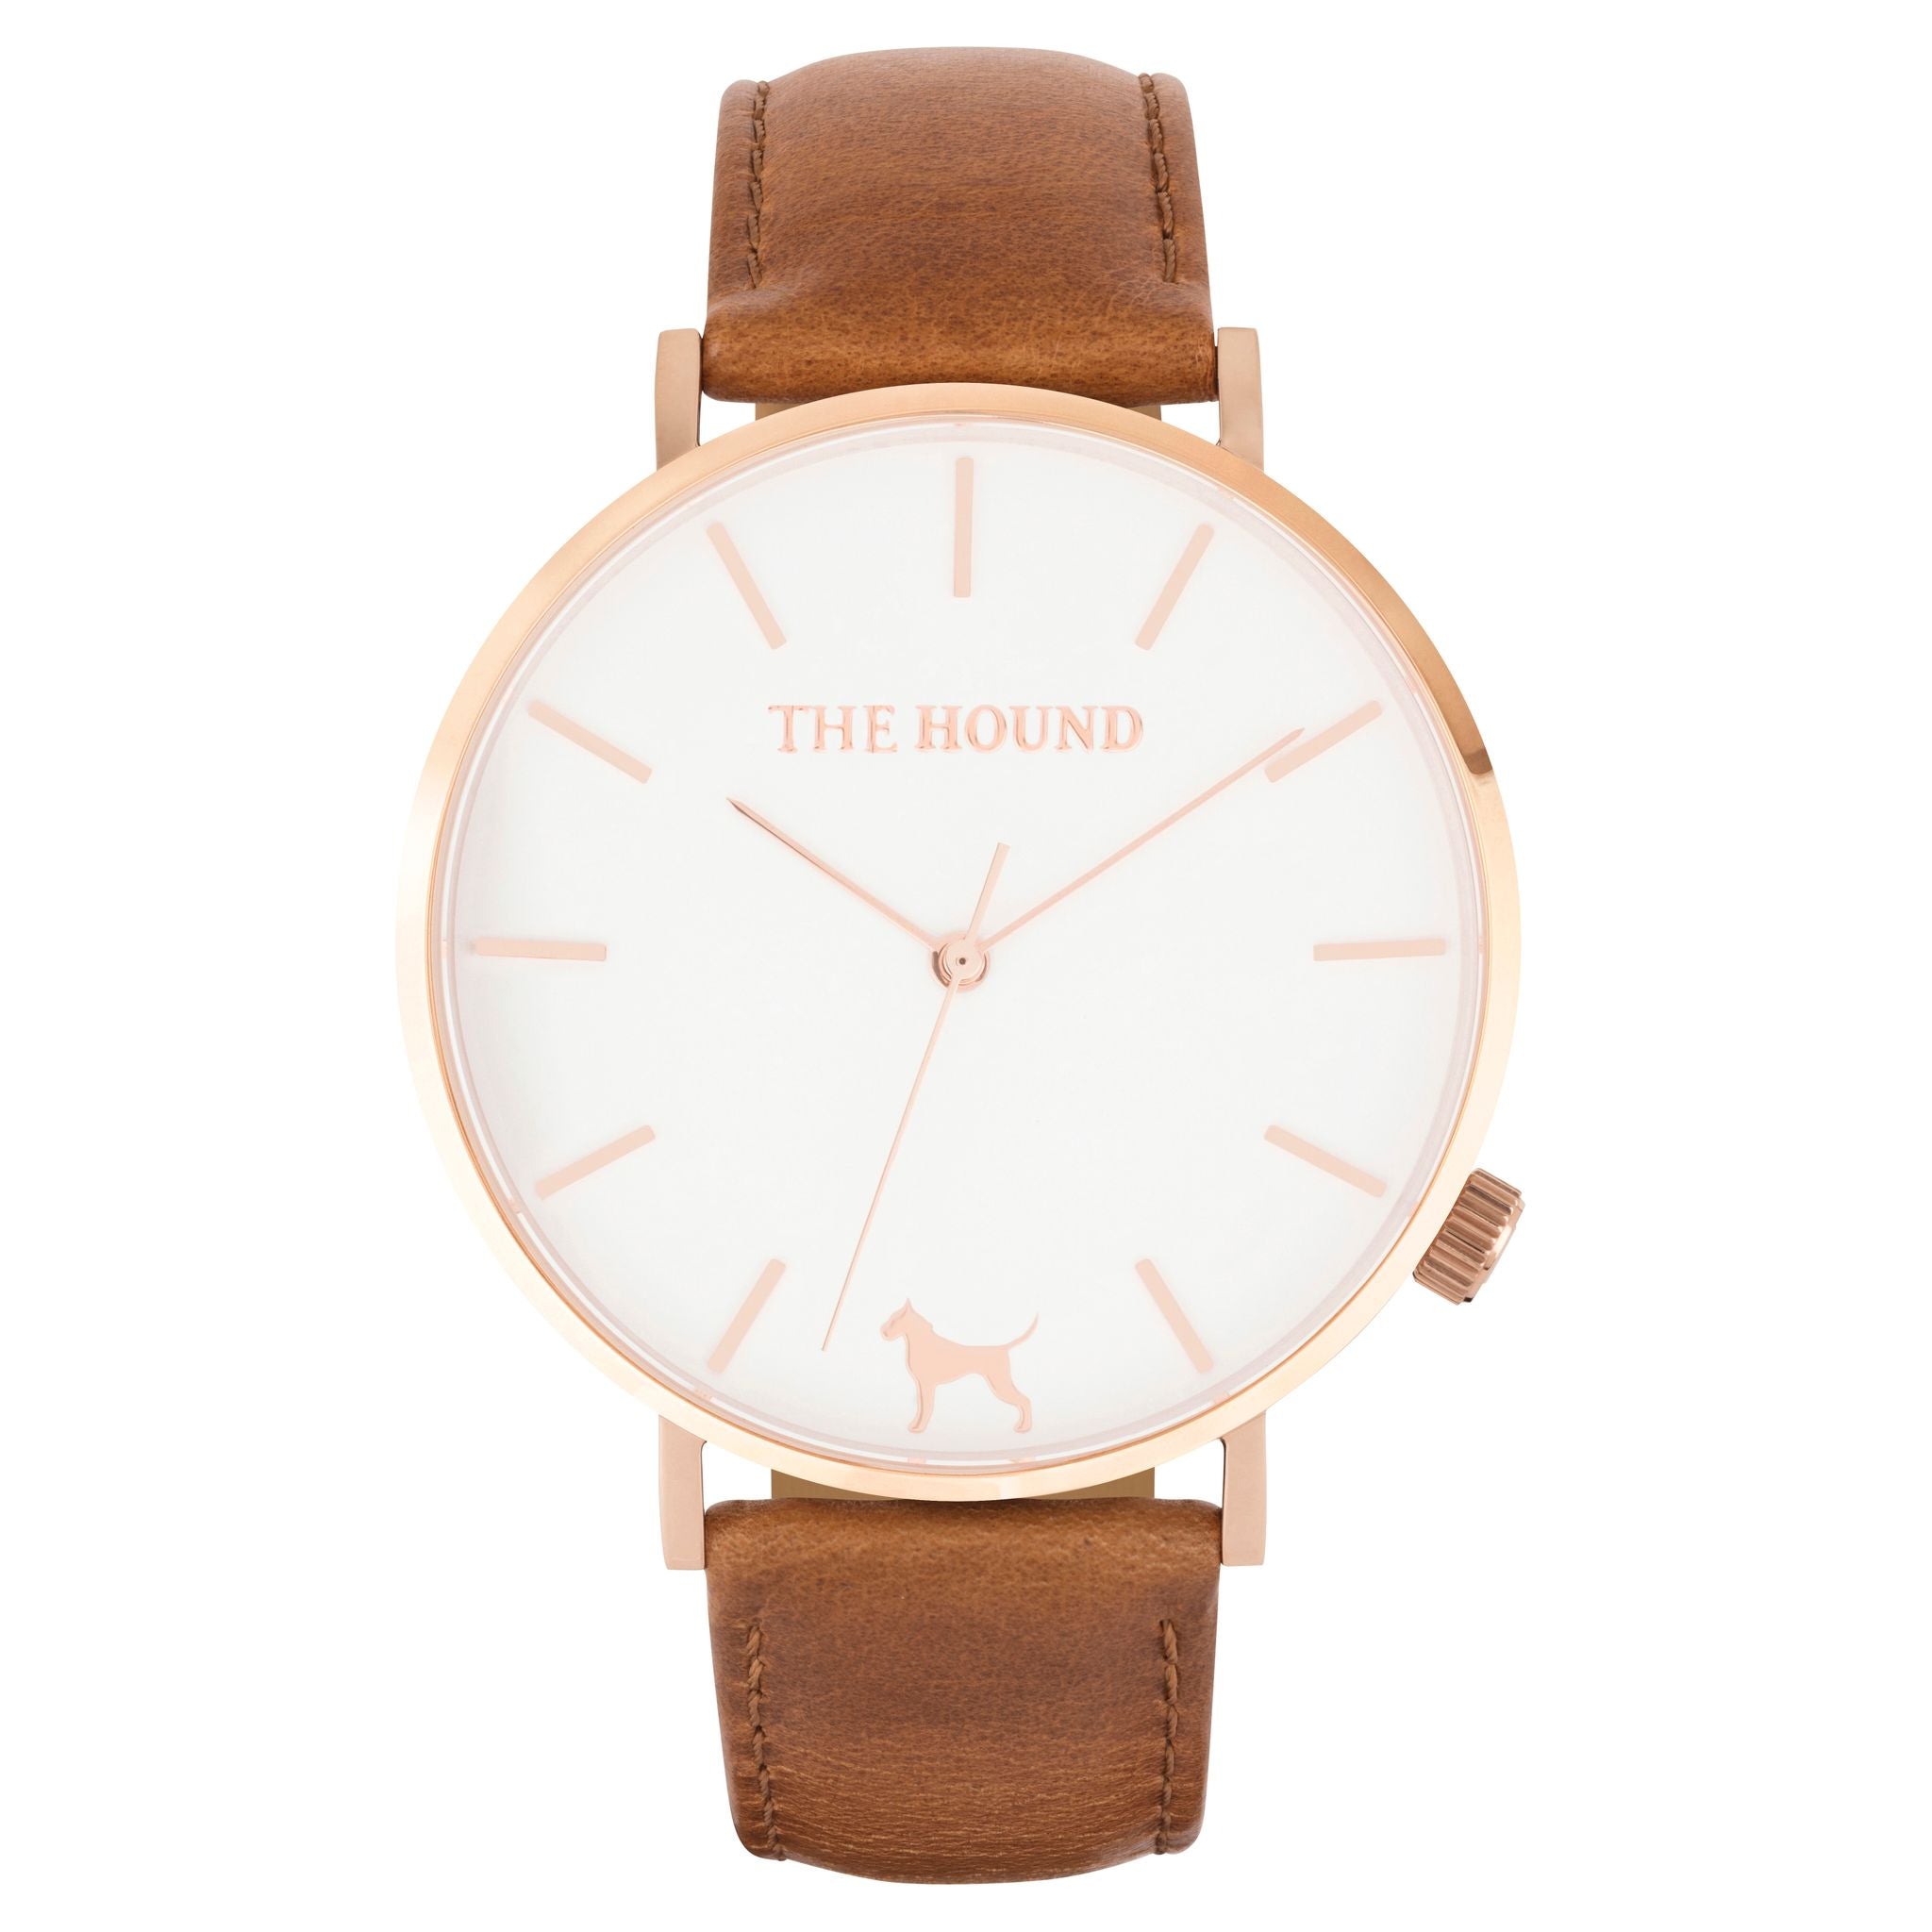 Extra Watch - White Rose & Tan Leather